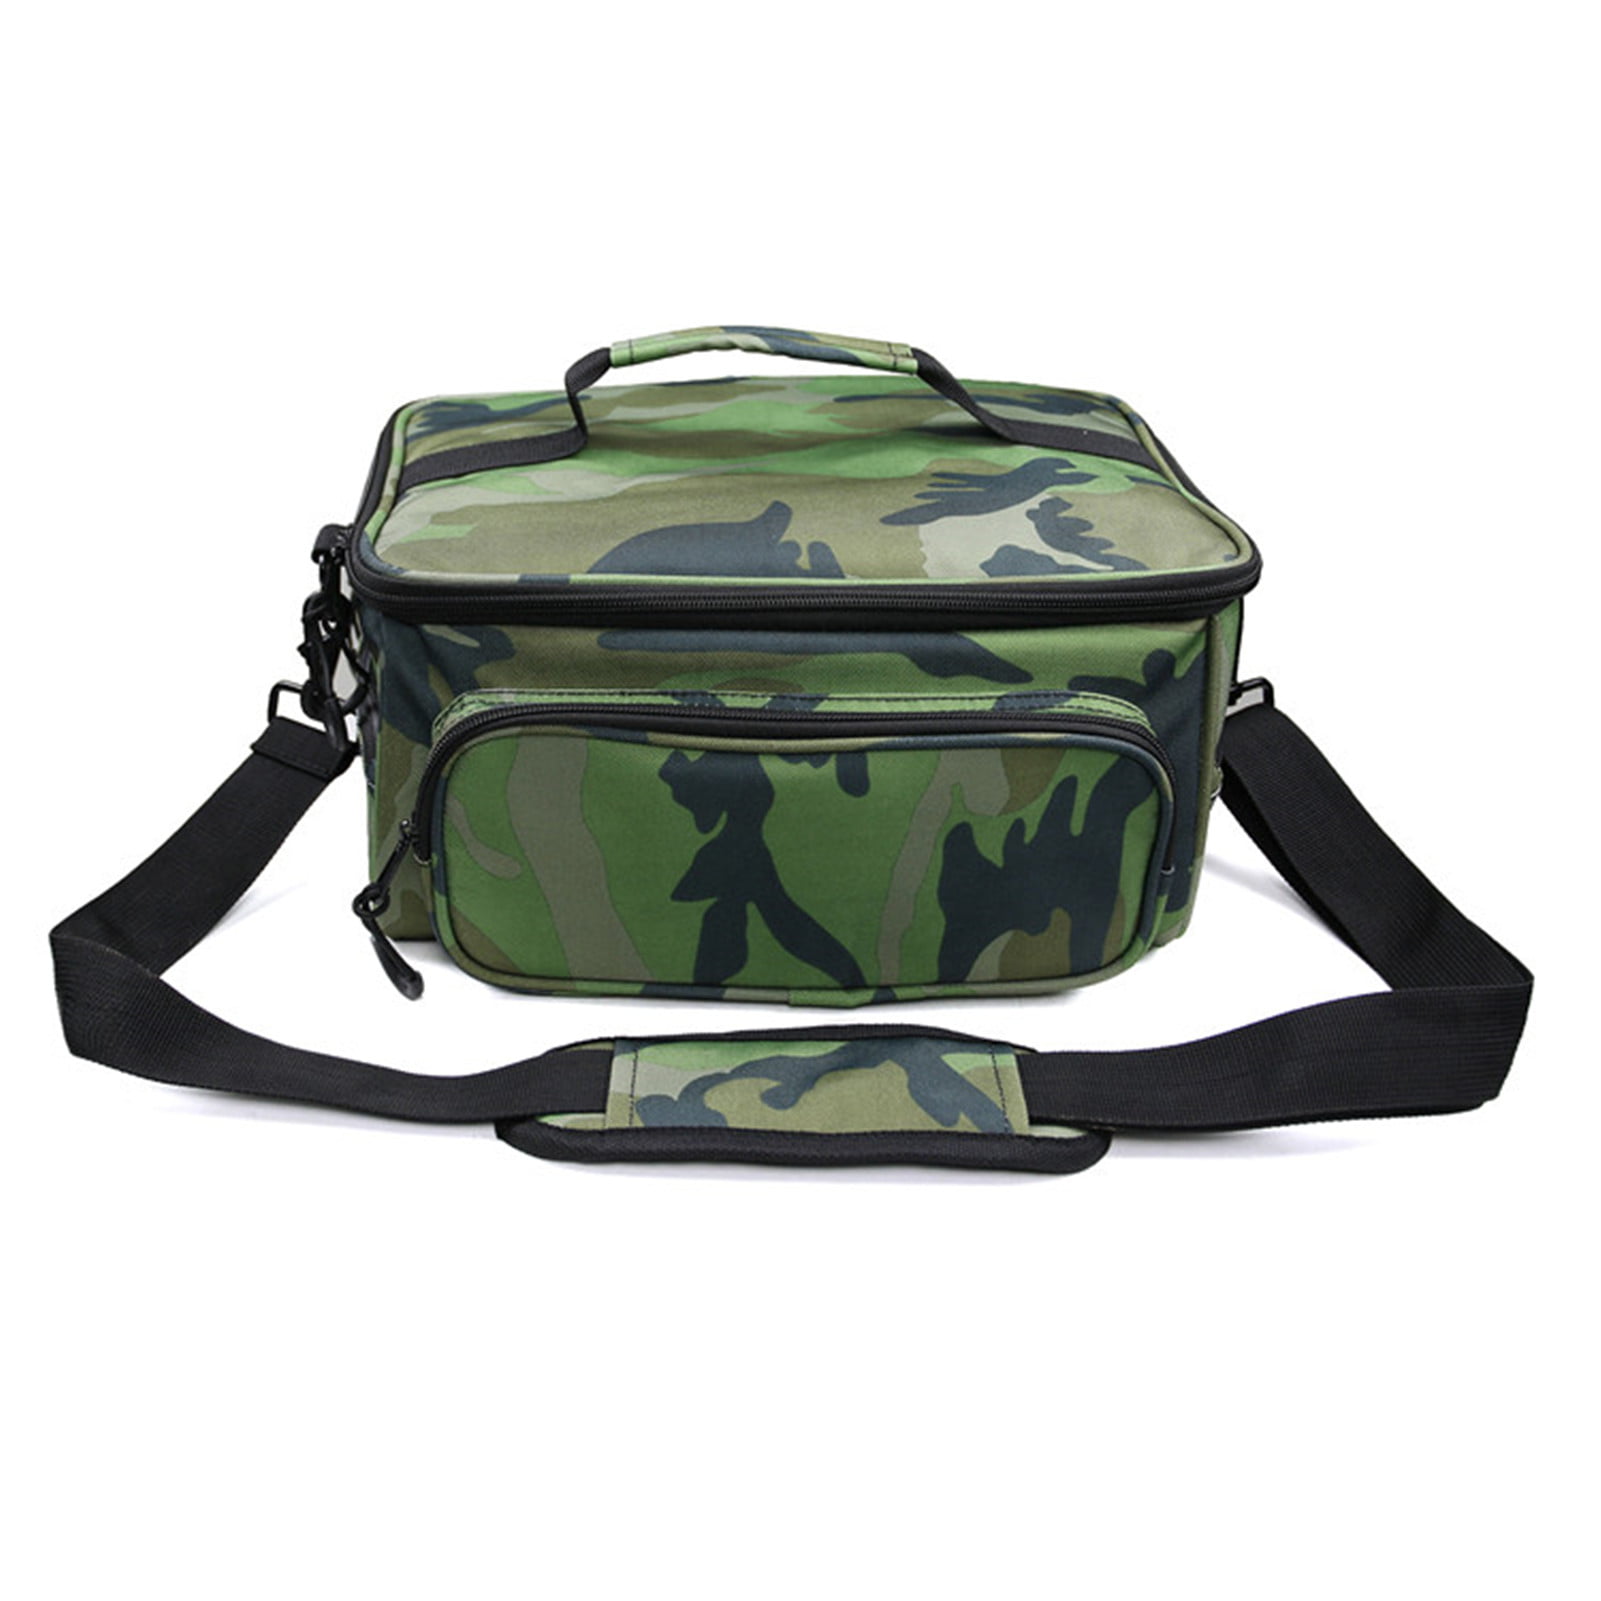 Details about    Fishing Tackle Backpack Storage Bag Outdoor Shoulder Green Camo Tackle Box 